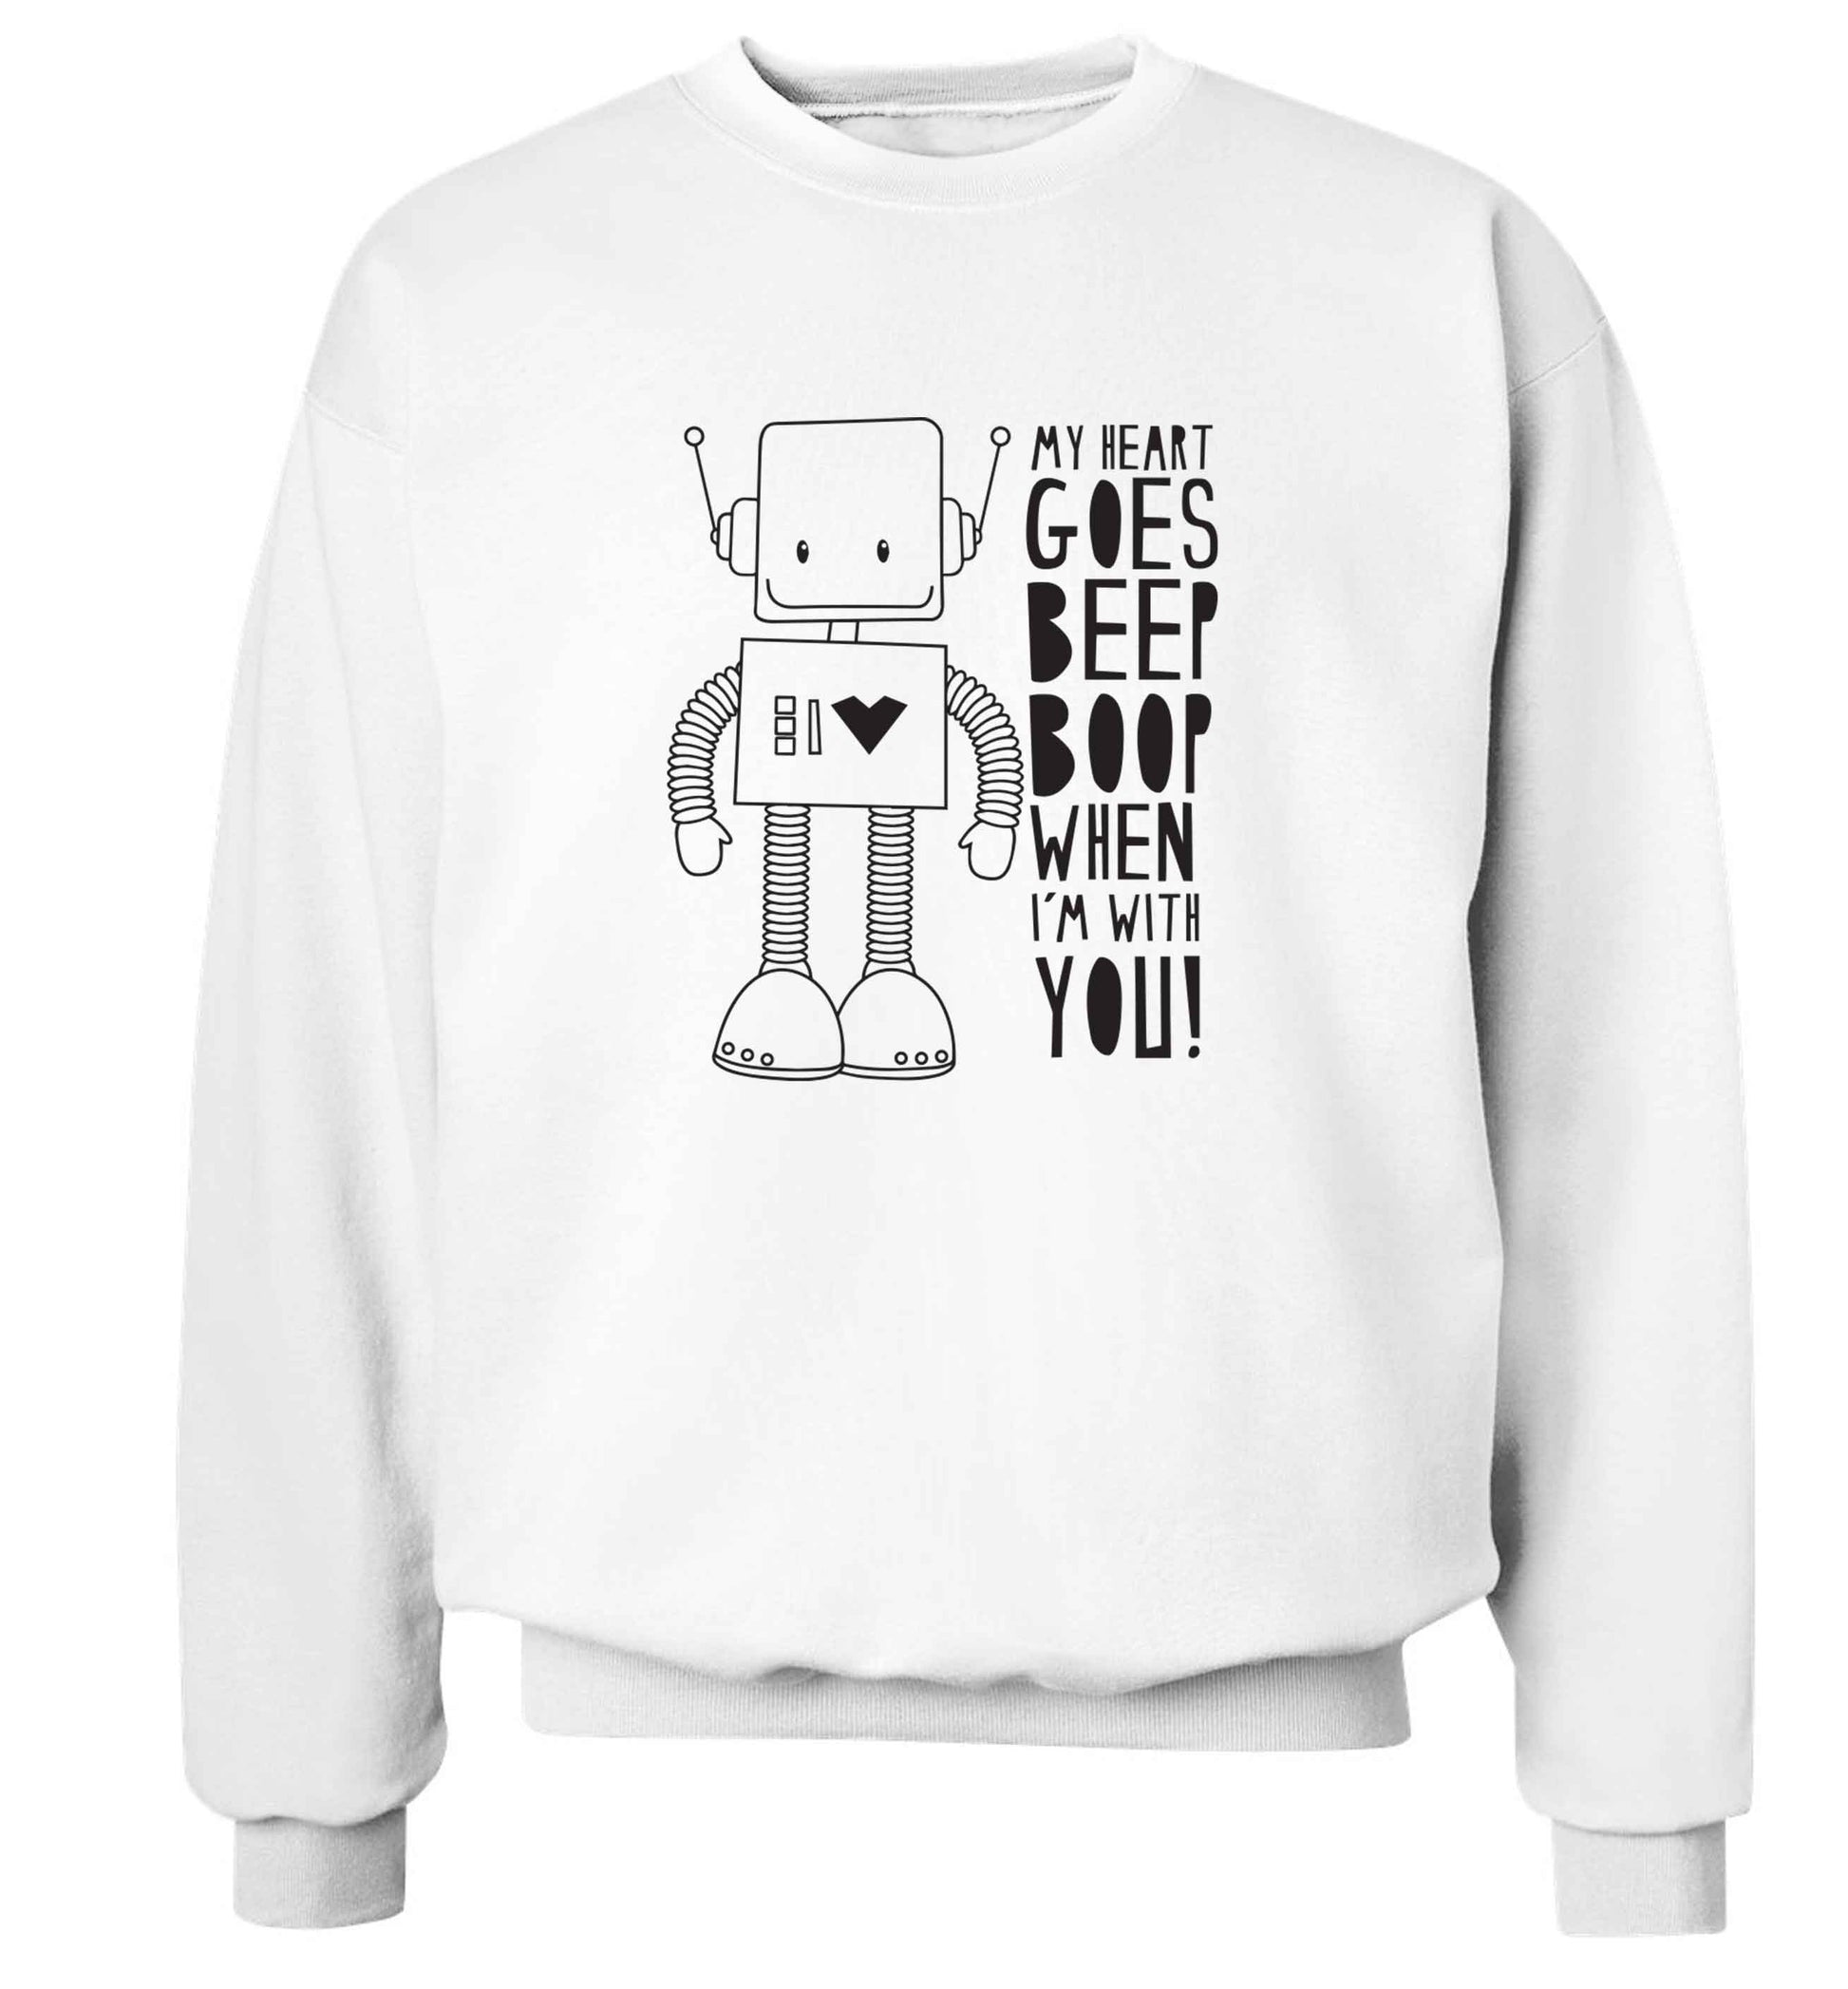 My heart goes beep boop when I'm with you adult's unisex white sweater 2XL